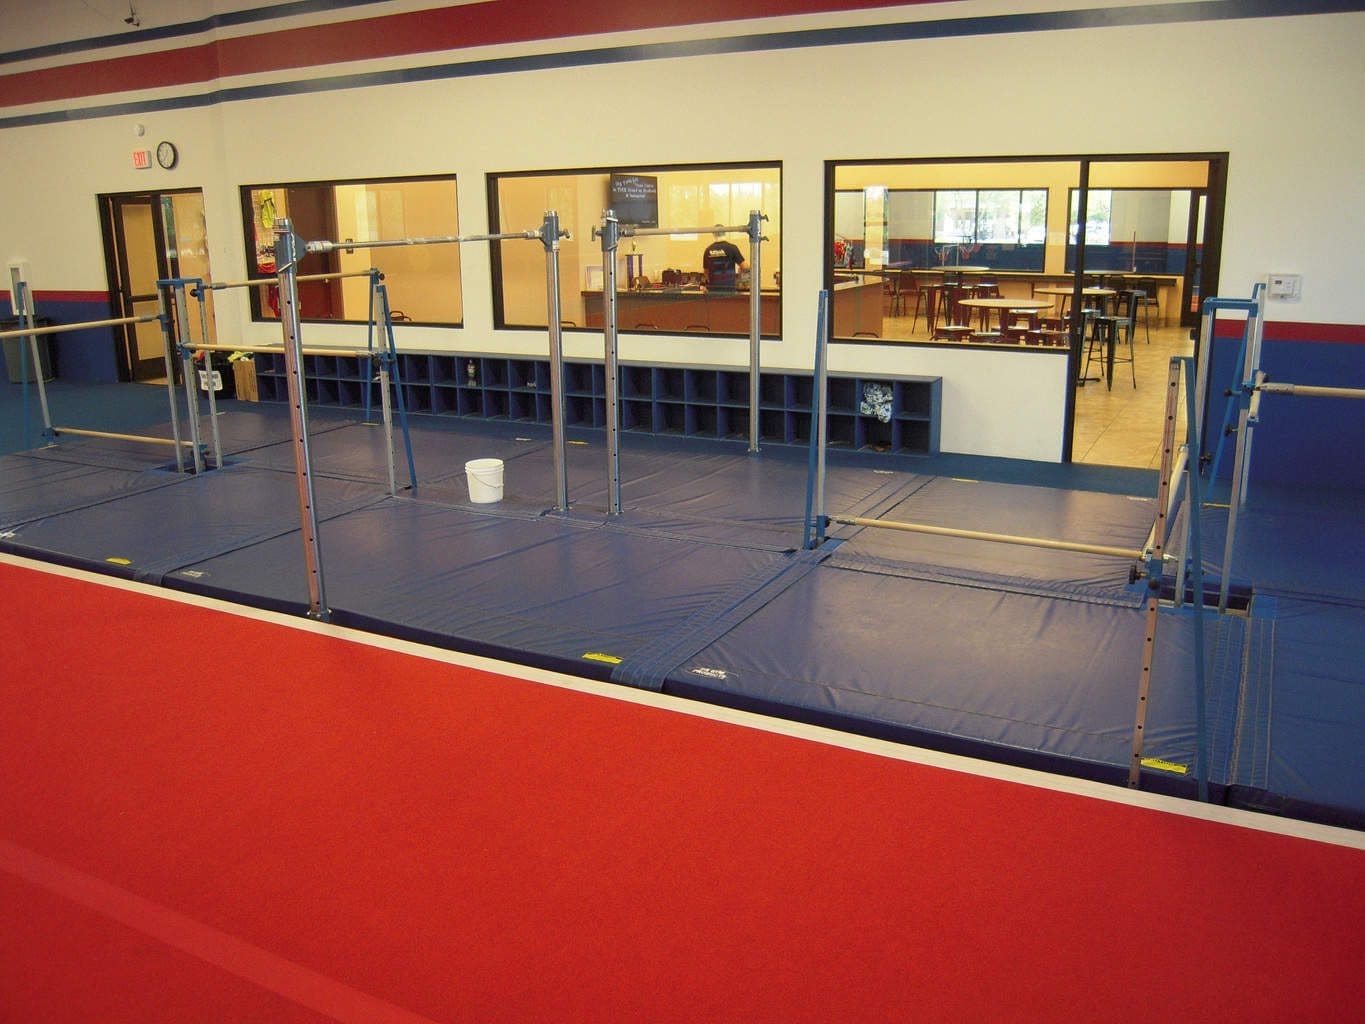 USA Youth Fitness Center The massive low bar system